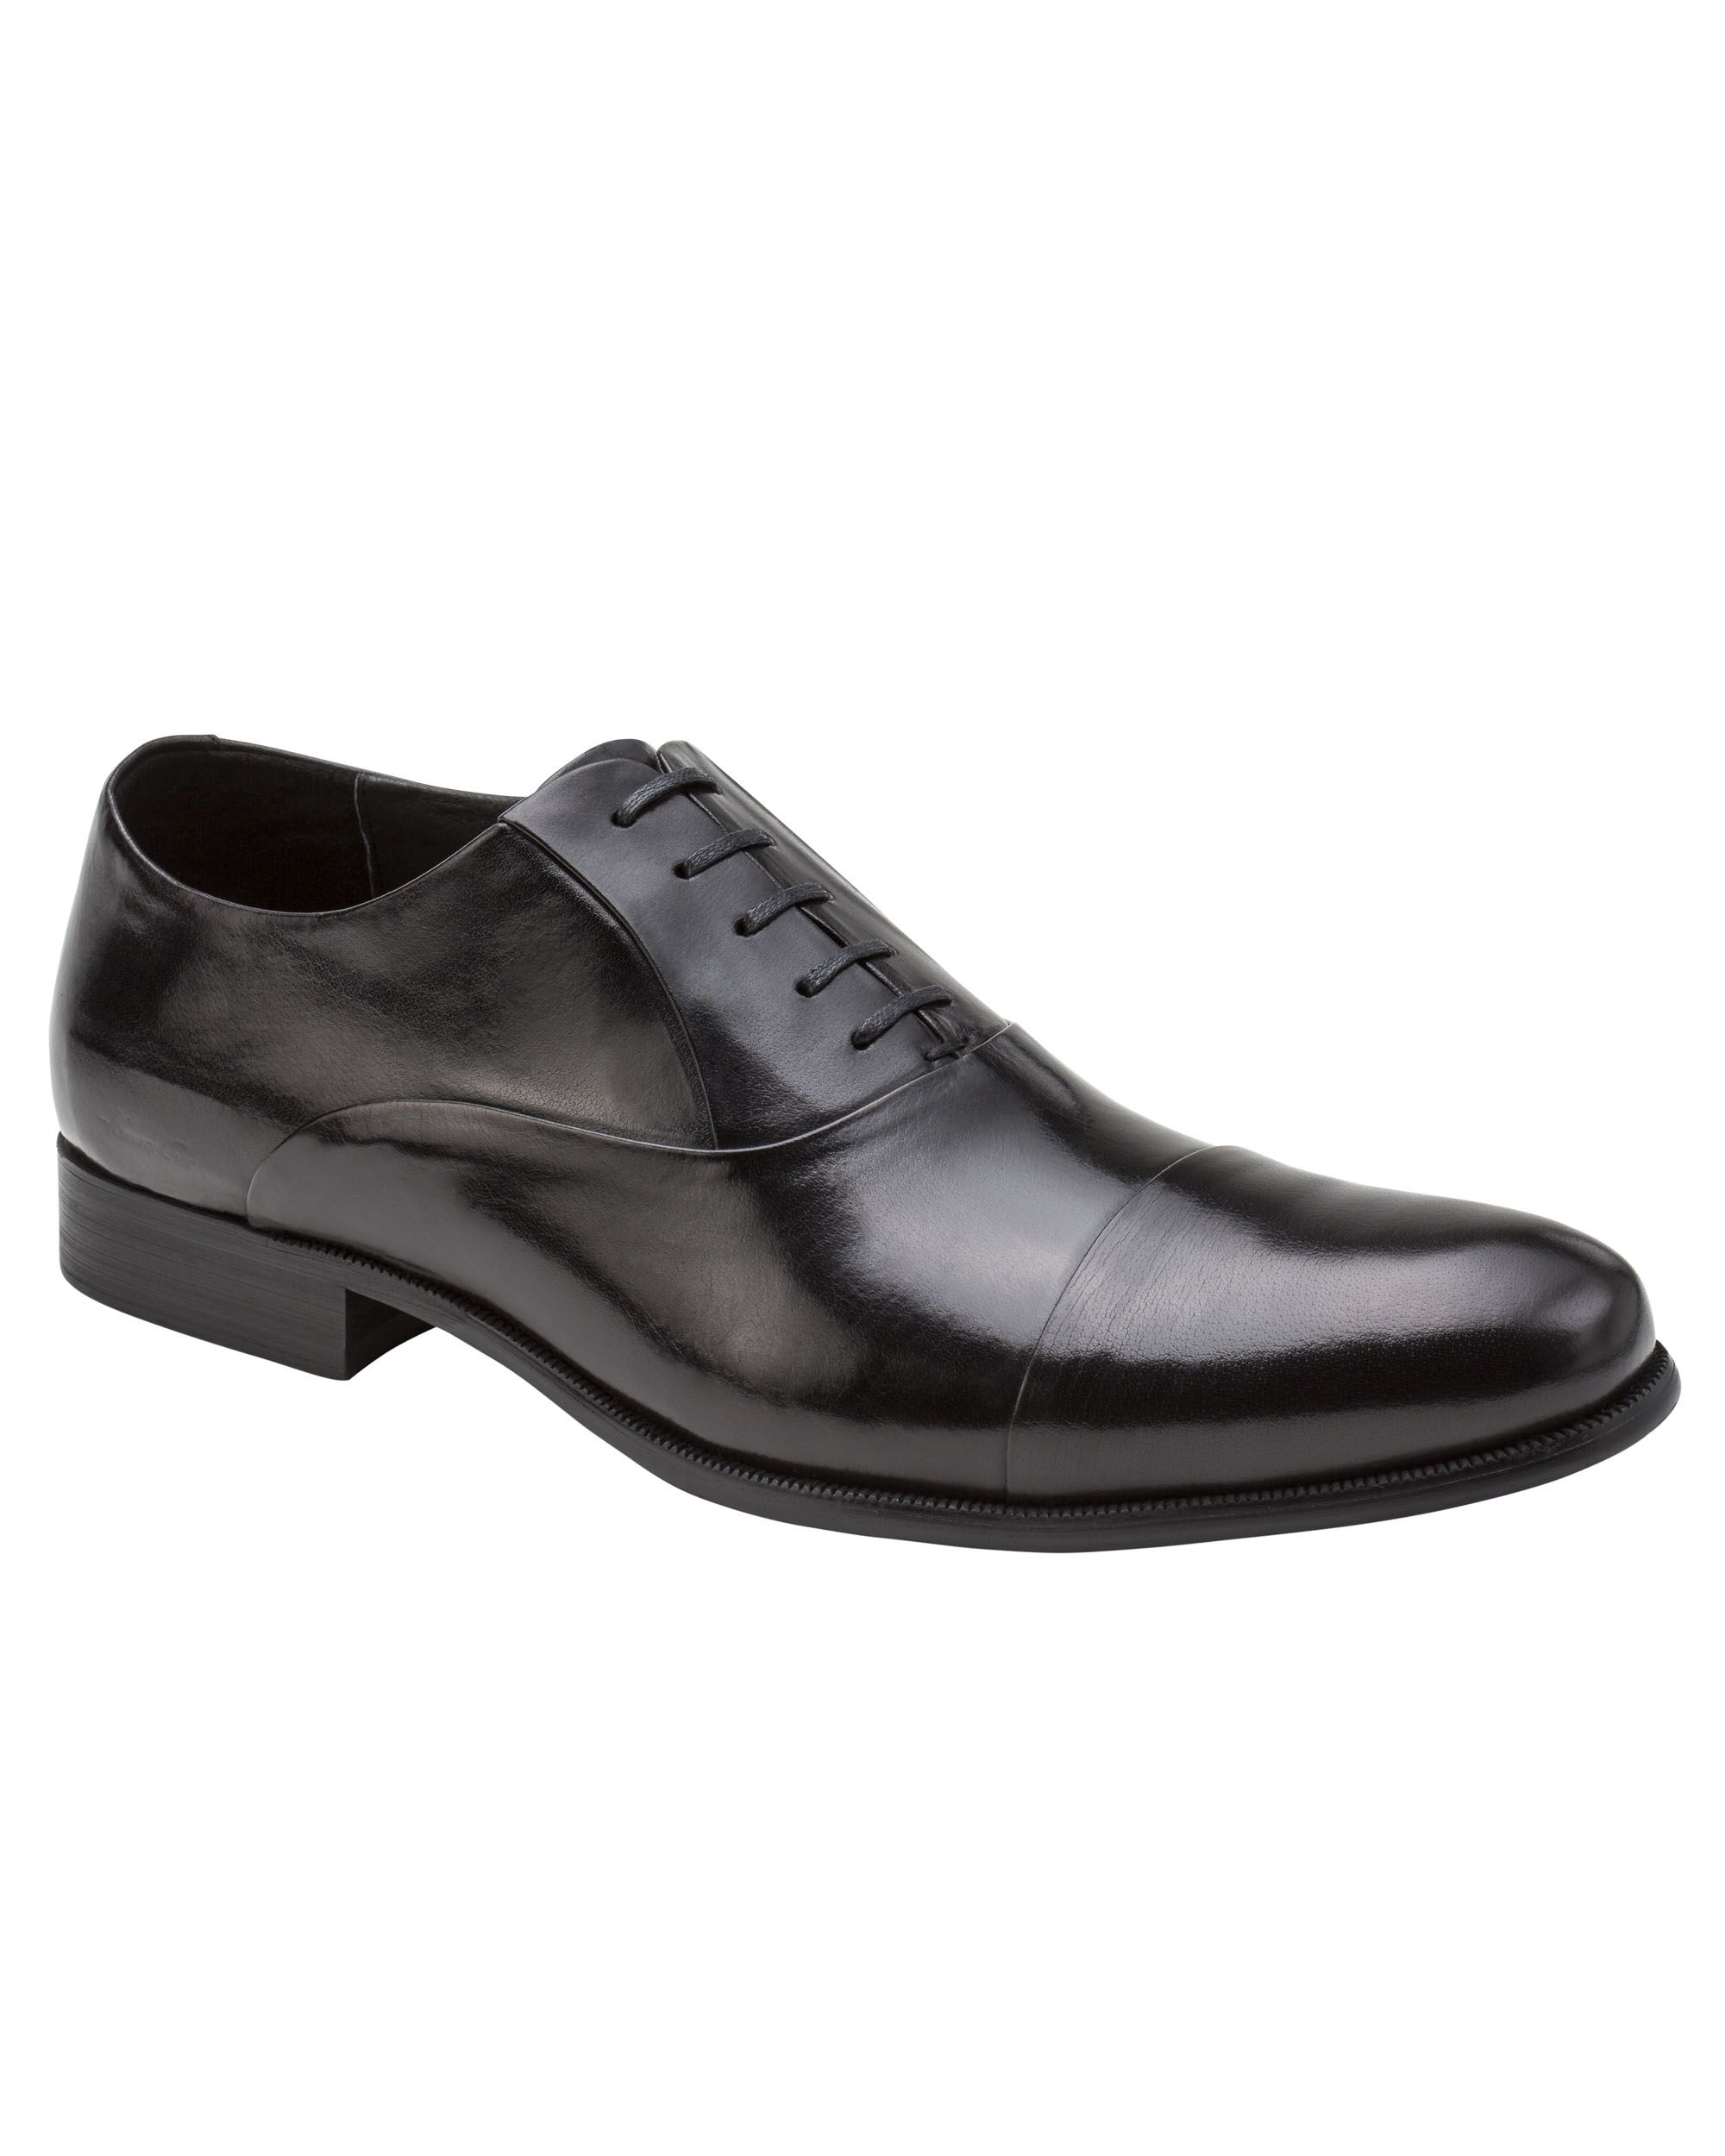 Kenneth Cole New York Chief Council Zapatos Hombre S 